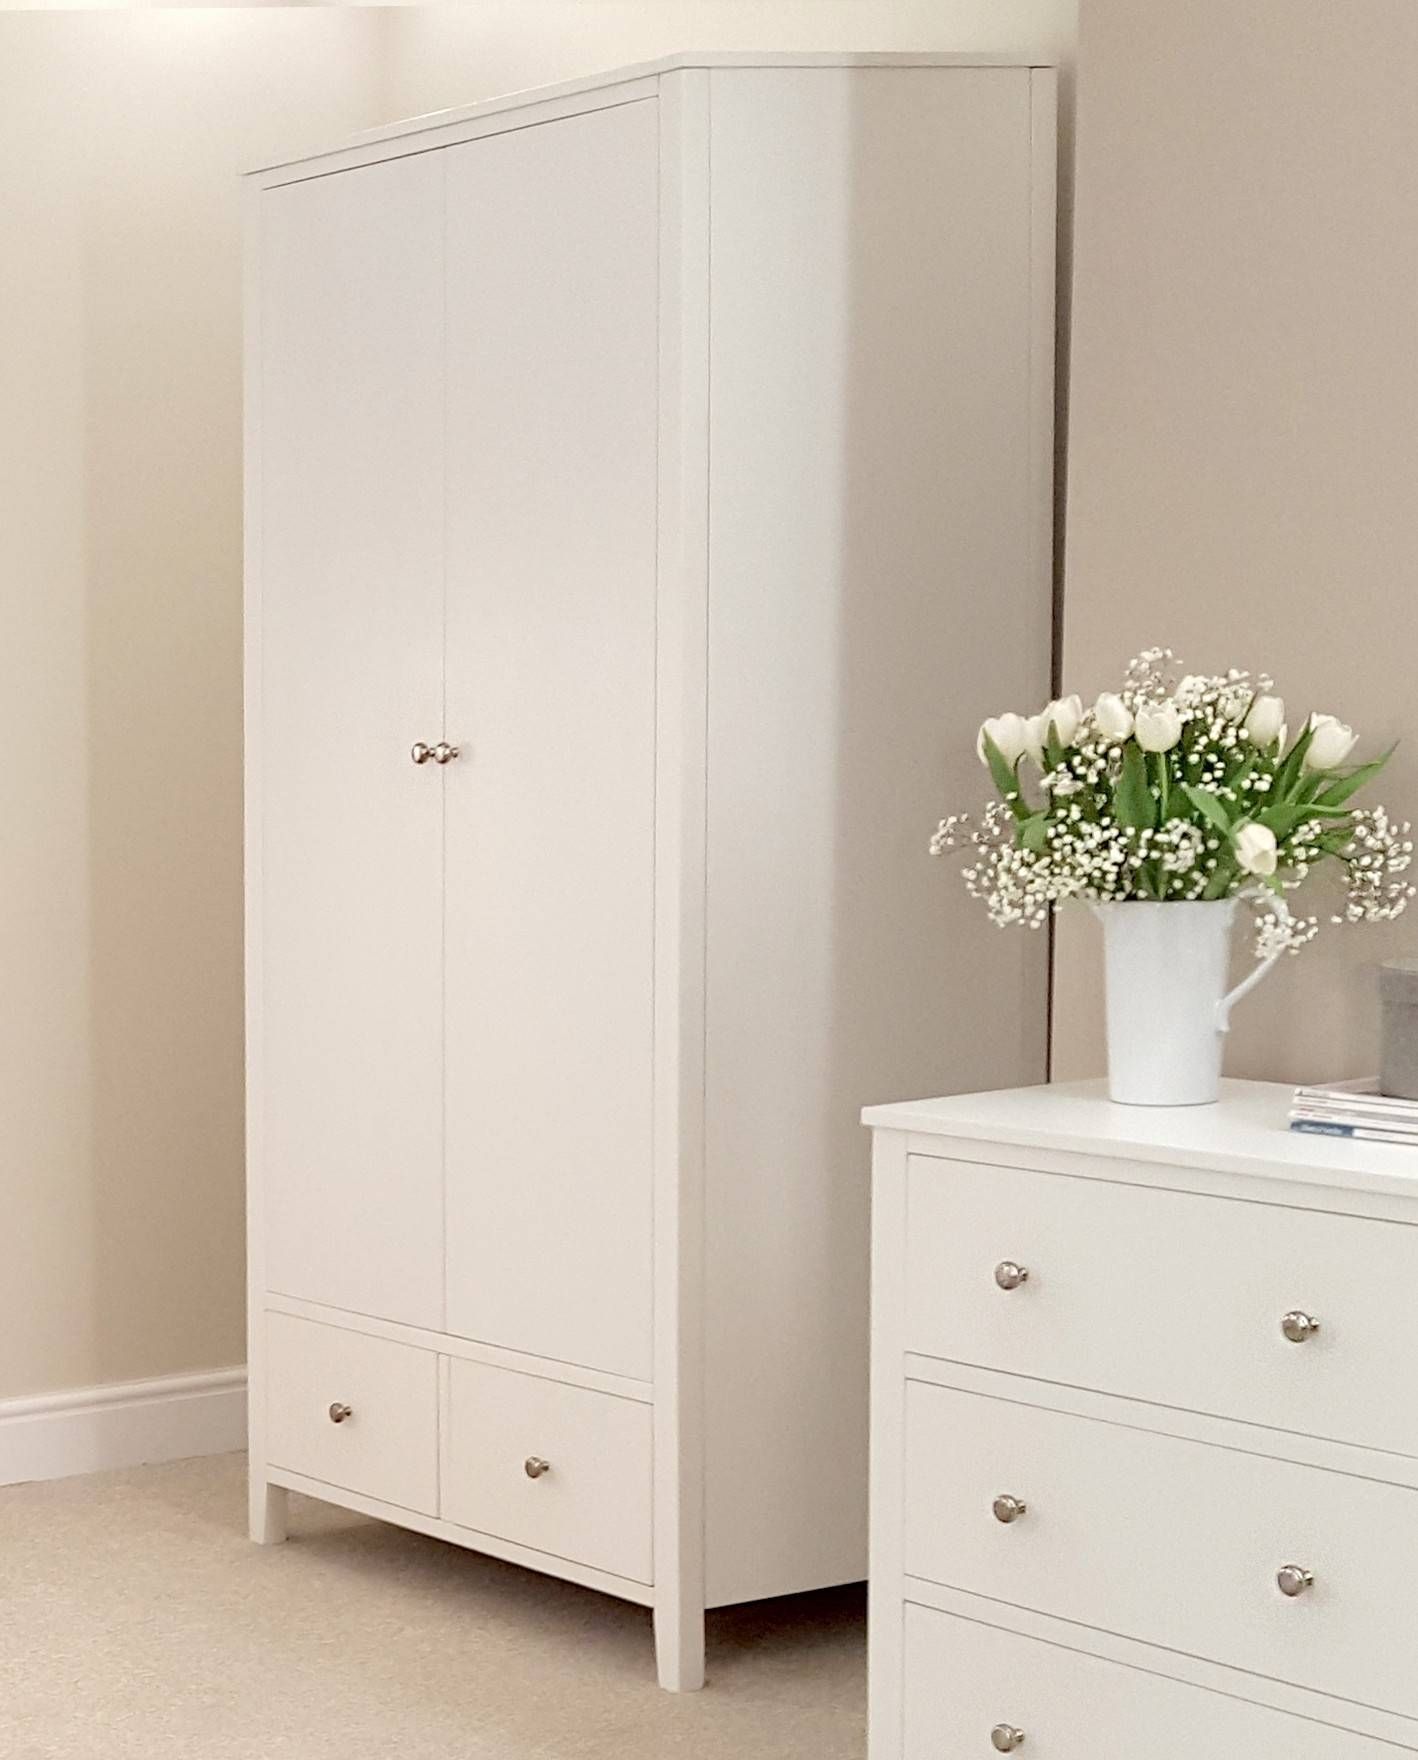 Brooklyn White Double Wardrobe With 2 Drawers| Bedroom Furniture With Regard To Large White Wardrobes With Drawers (View 8 of 15)